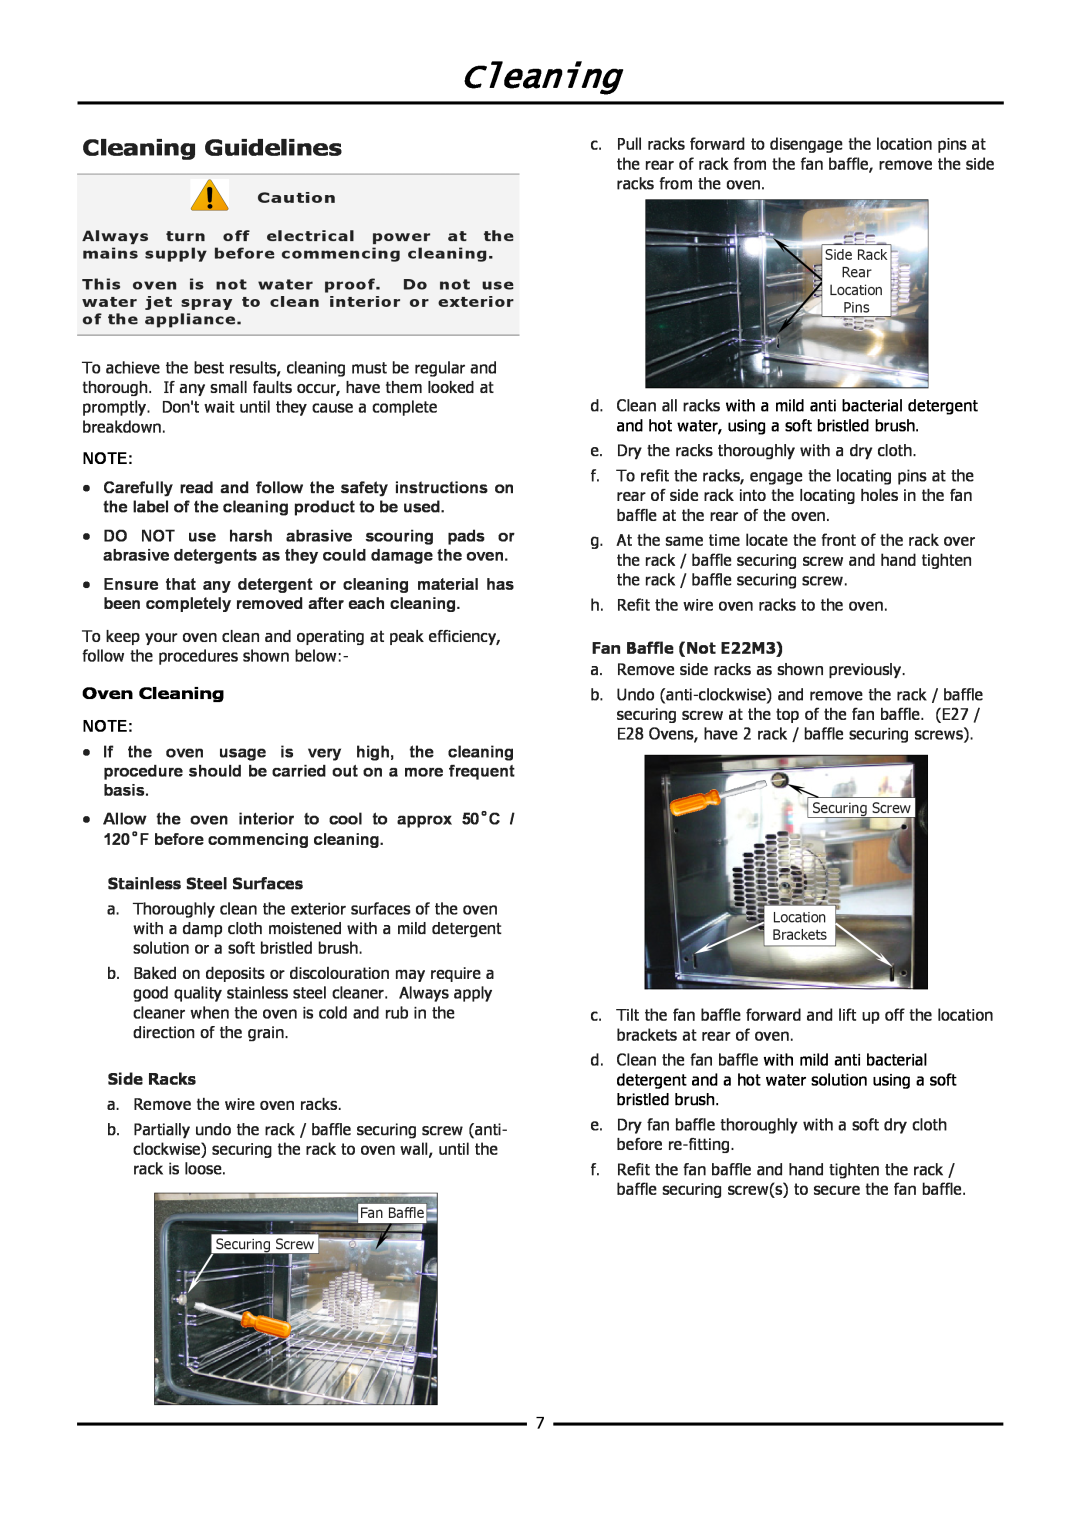 Moffat E20M operation manual Cleaning Guidelines 